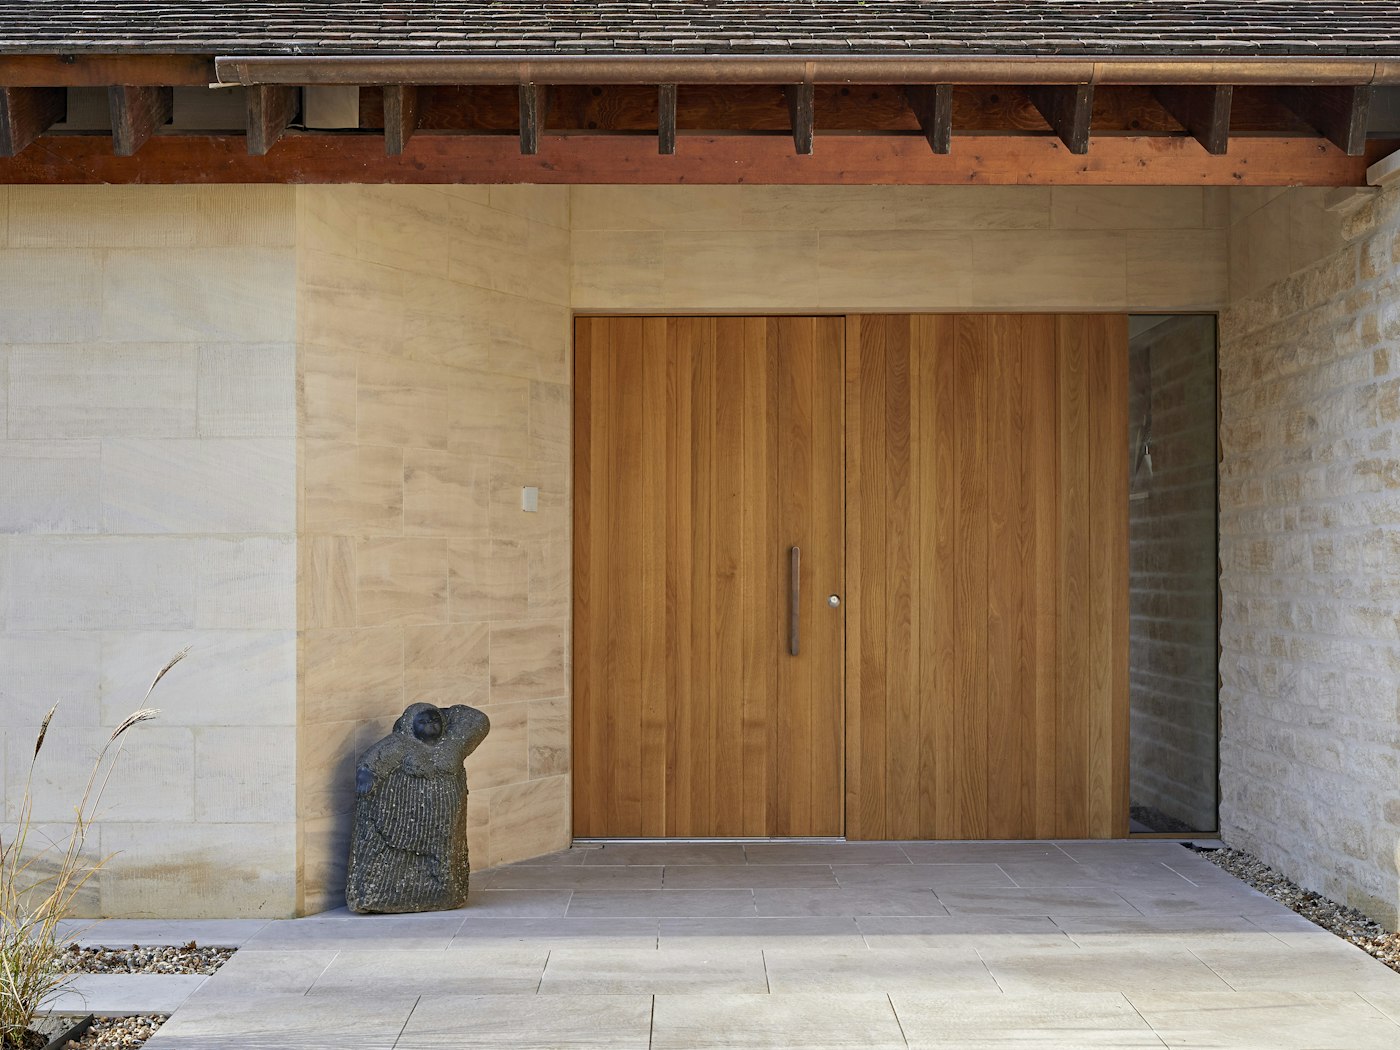 The front entrance has our flush Porto design combined with matching wood flush side panel that extends the appearance of the entrance to double the width